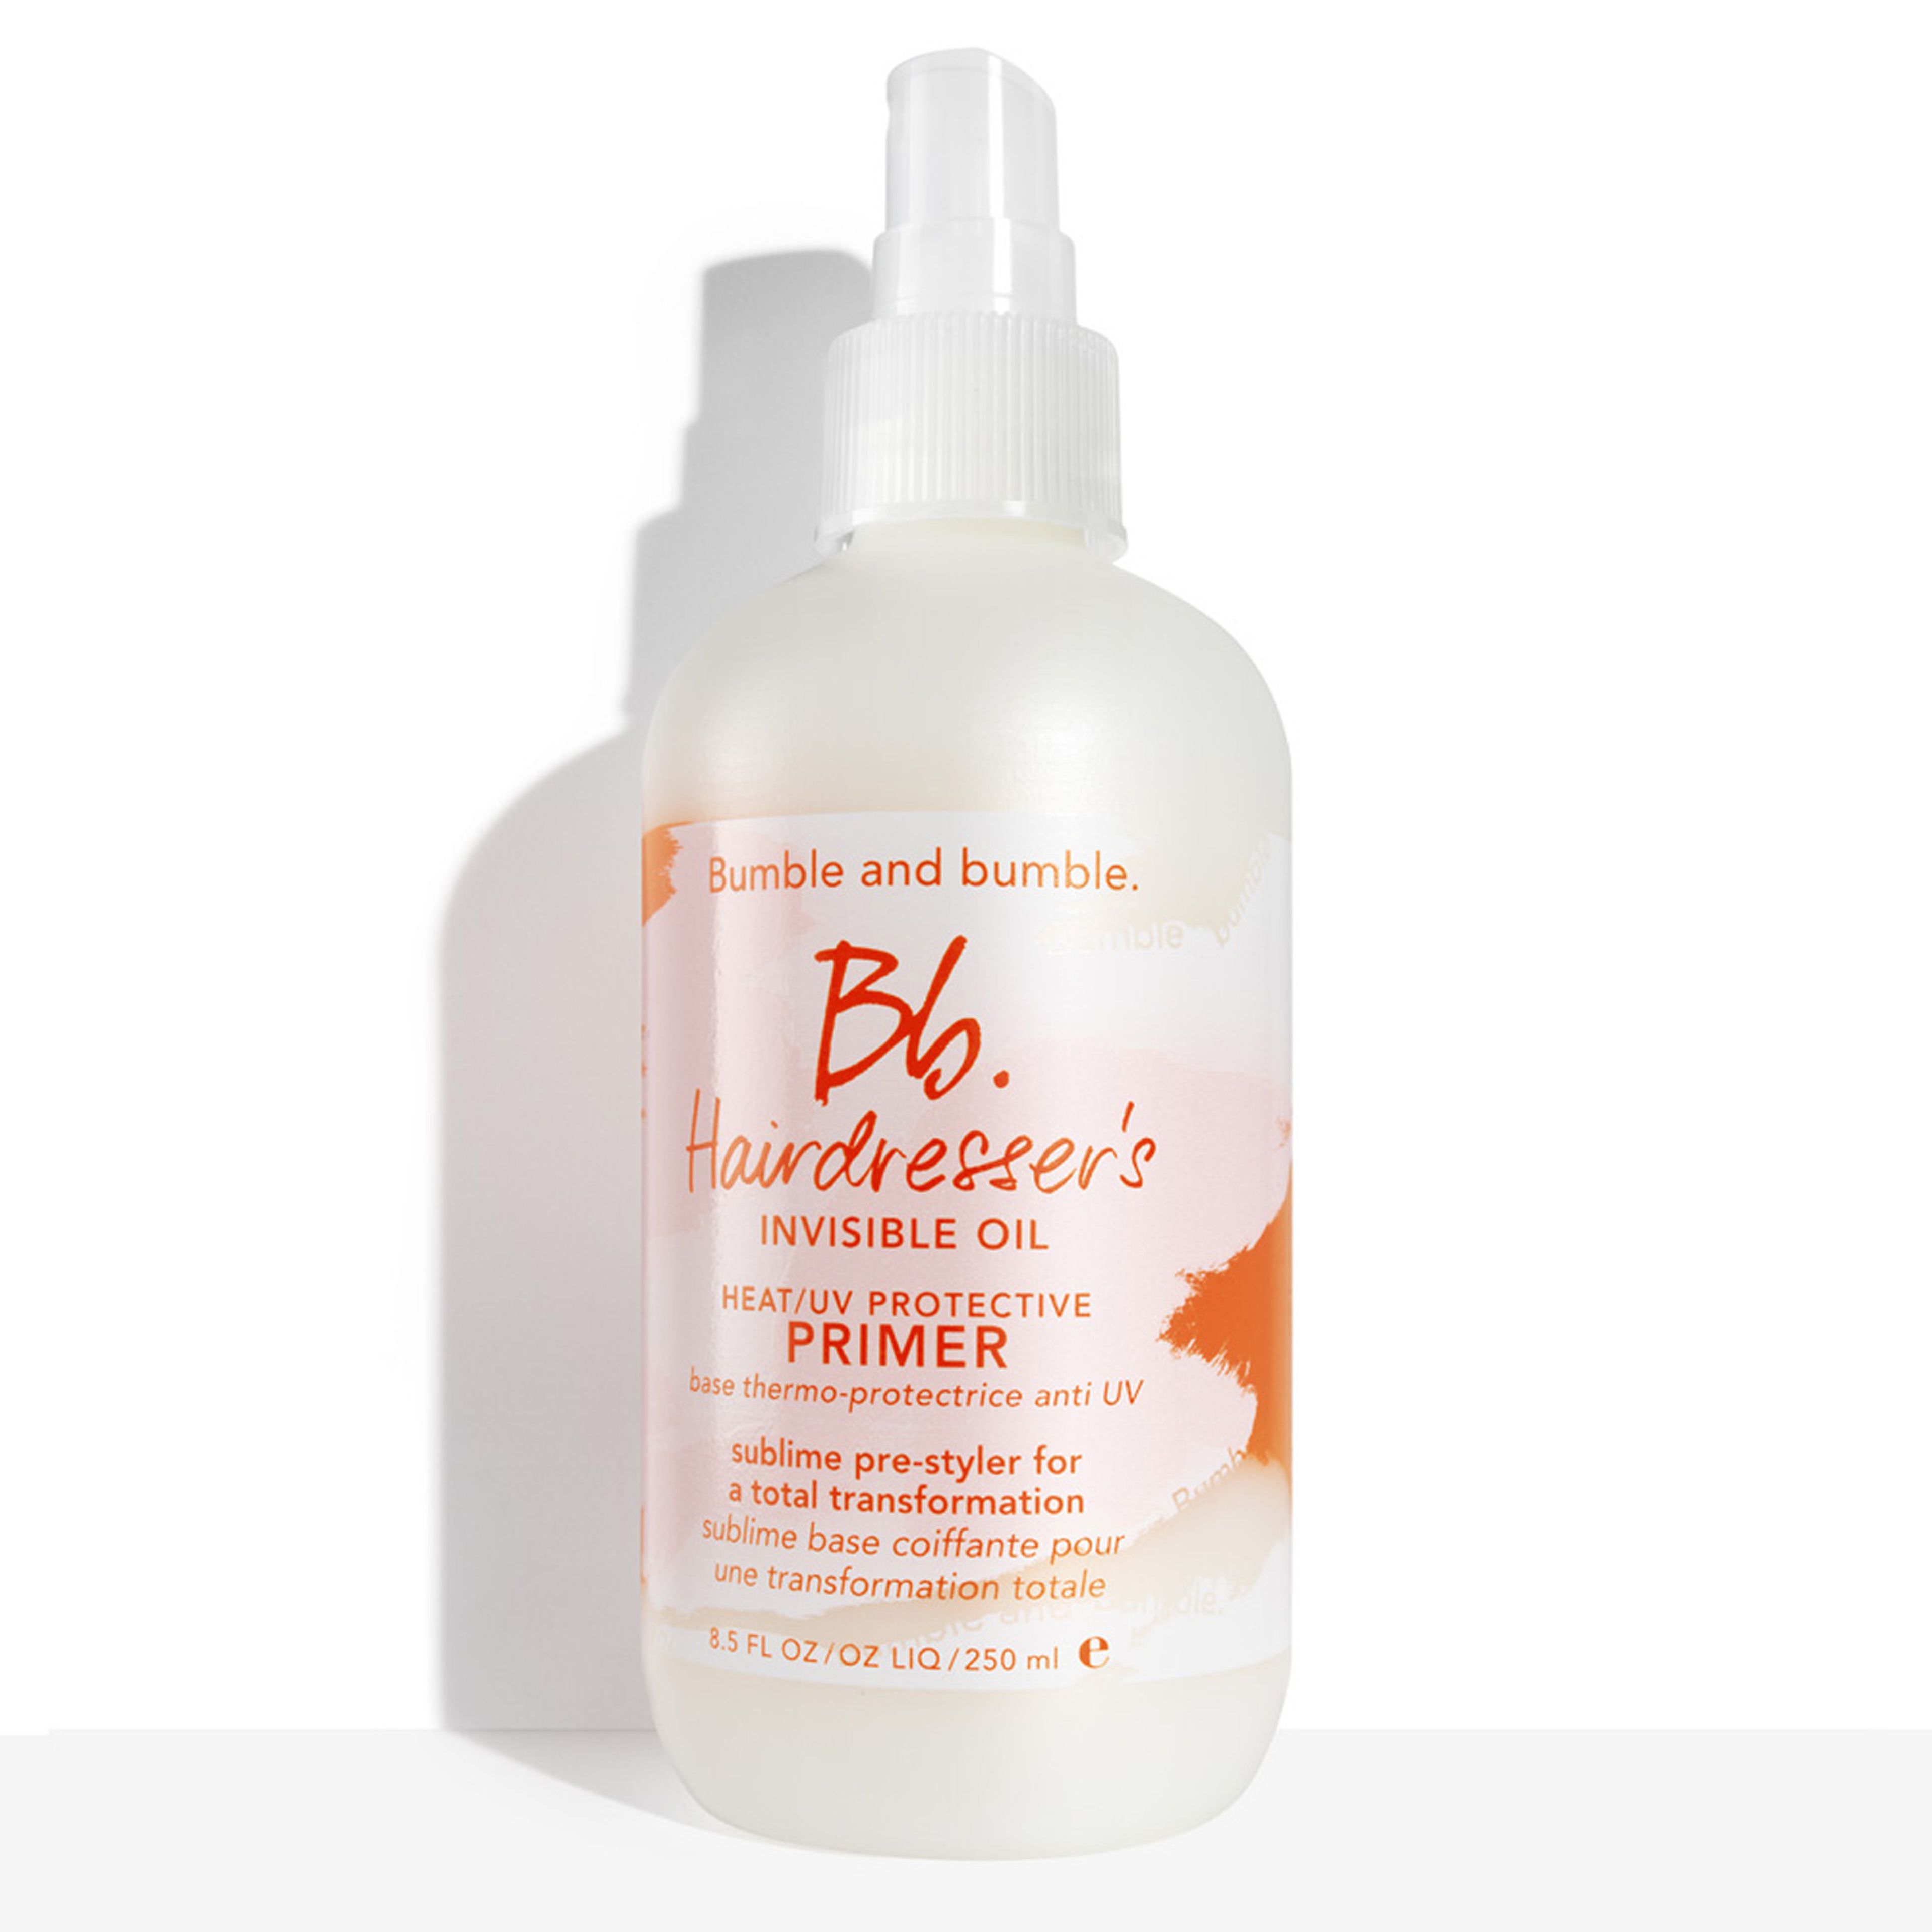 Bumble and bumble Hairdresser's Invisible Primer 1